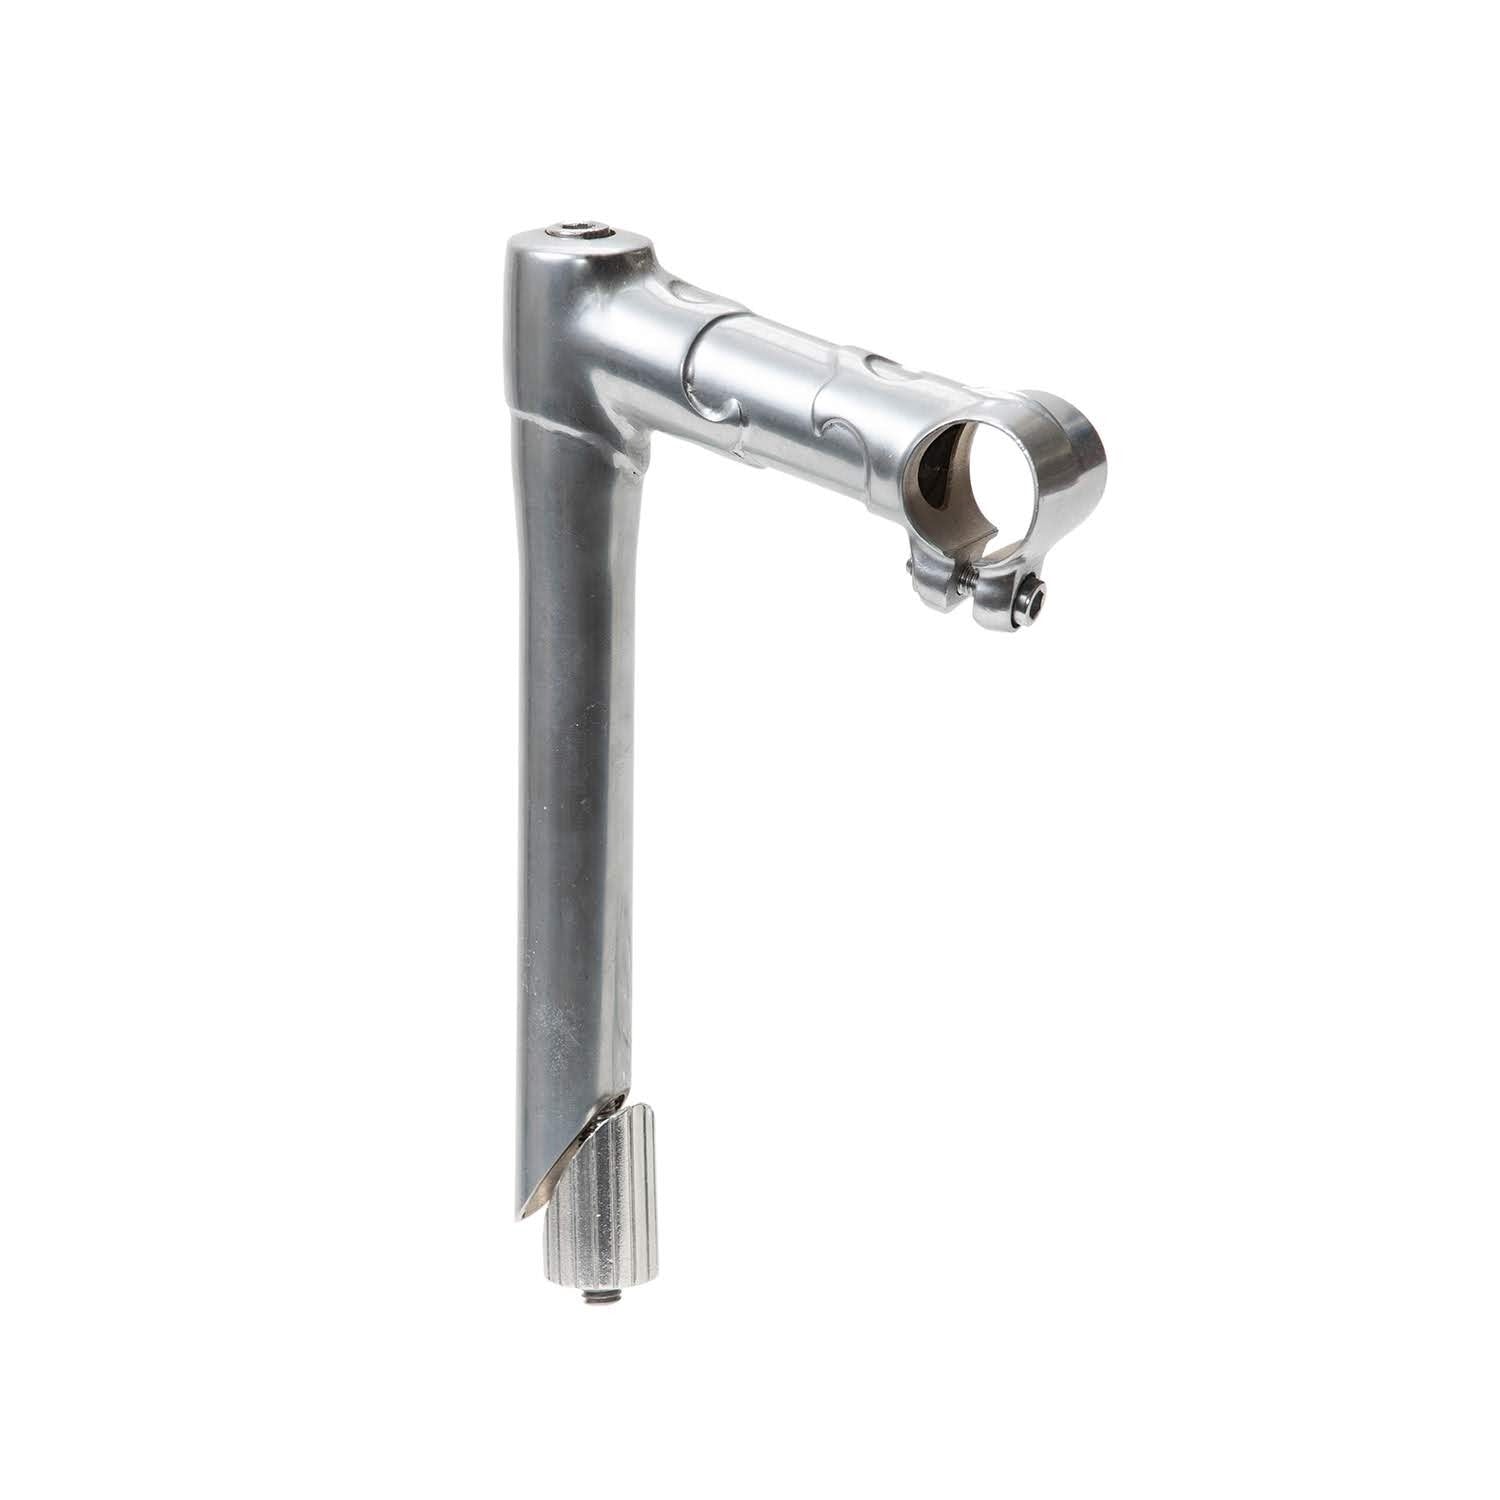 NITTO Lugged Quill Stem